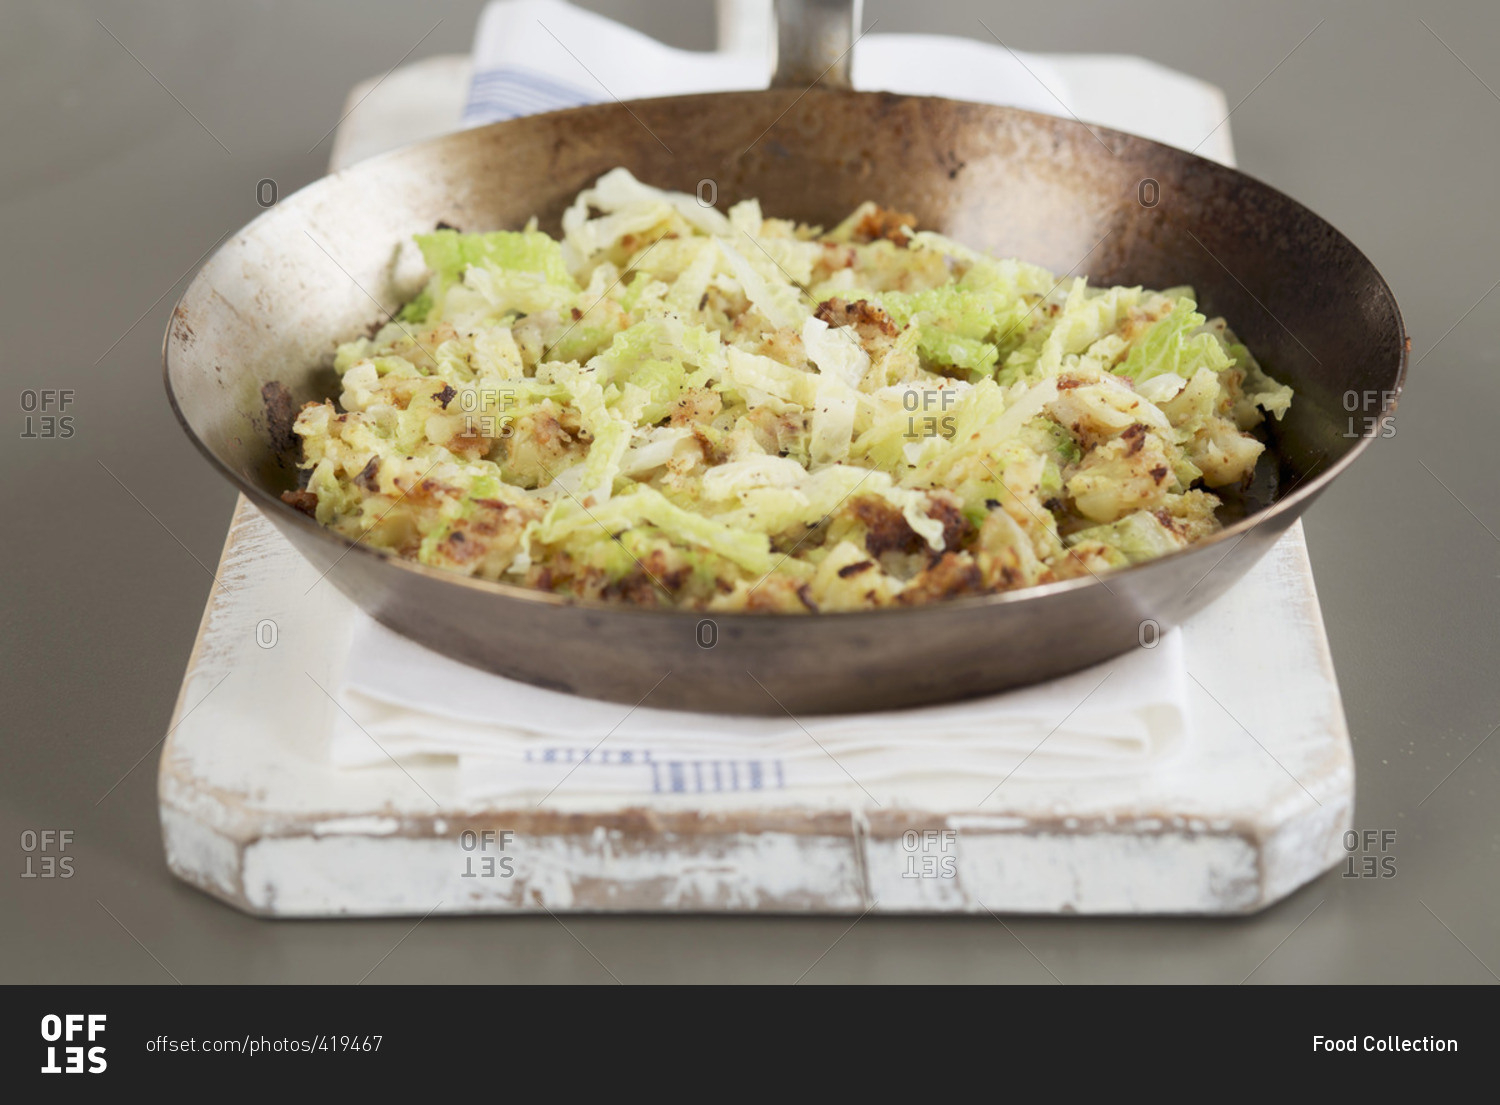 Bubble and squeak (fried mashed potato and cabbage, England)